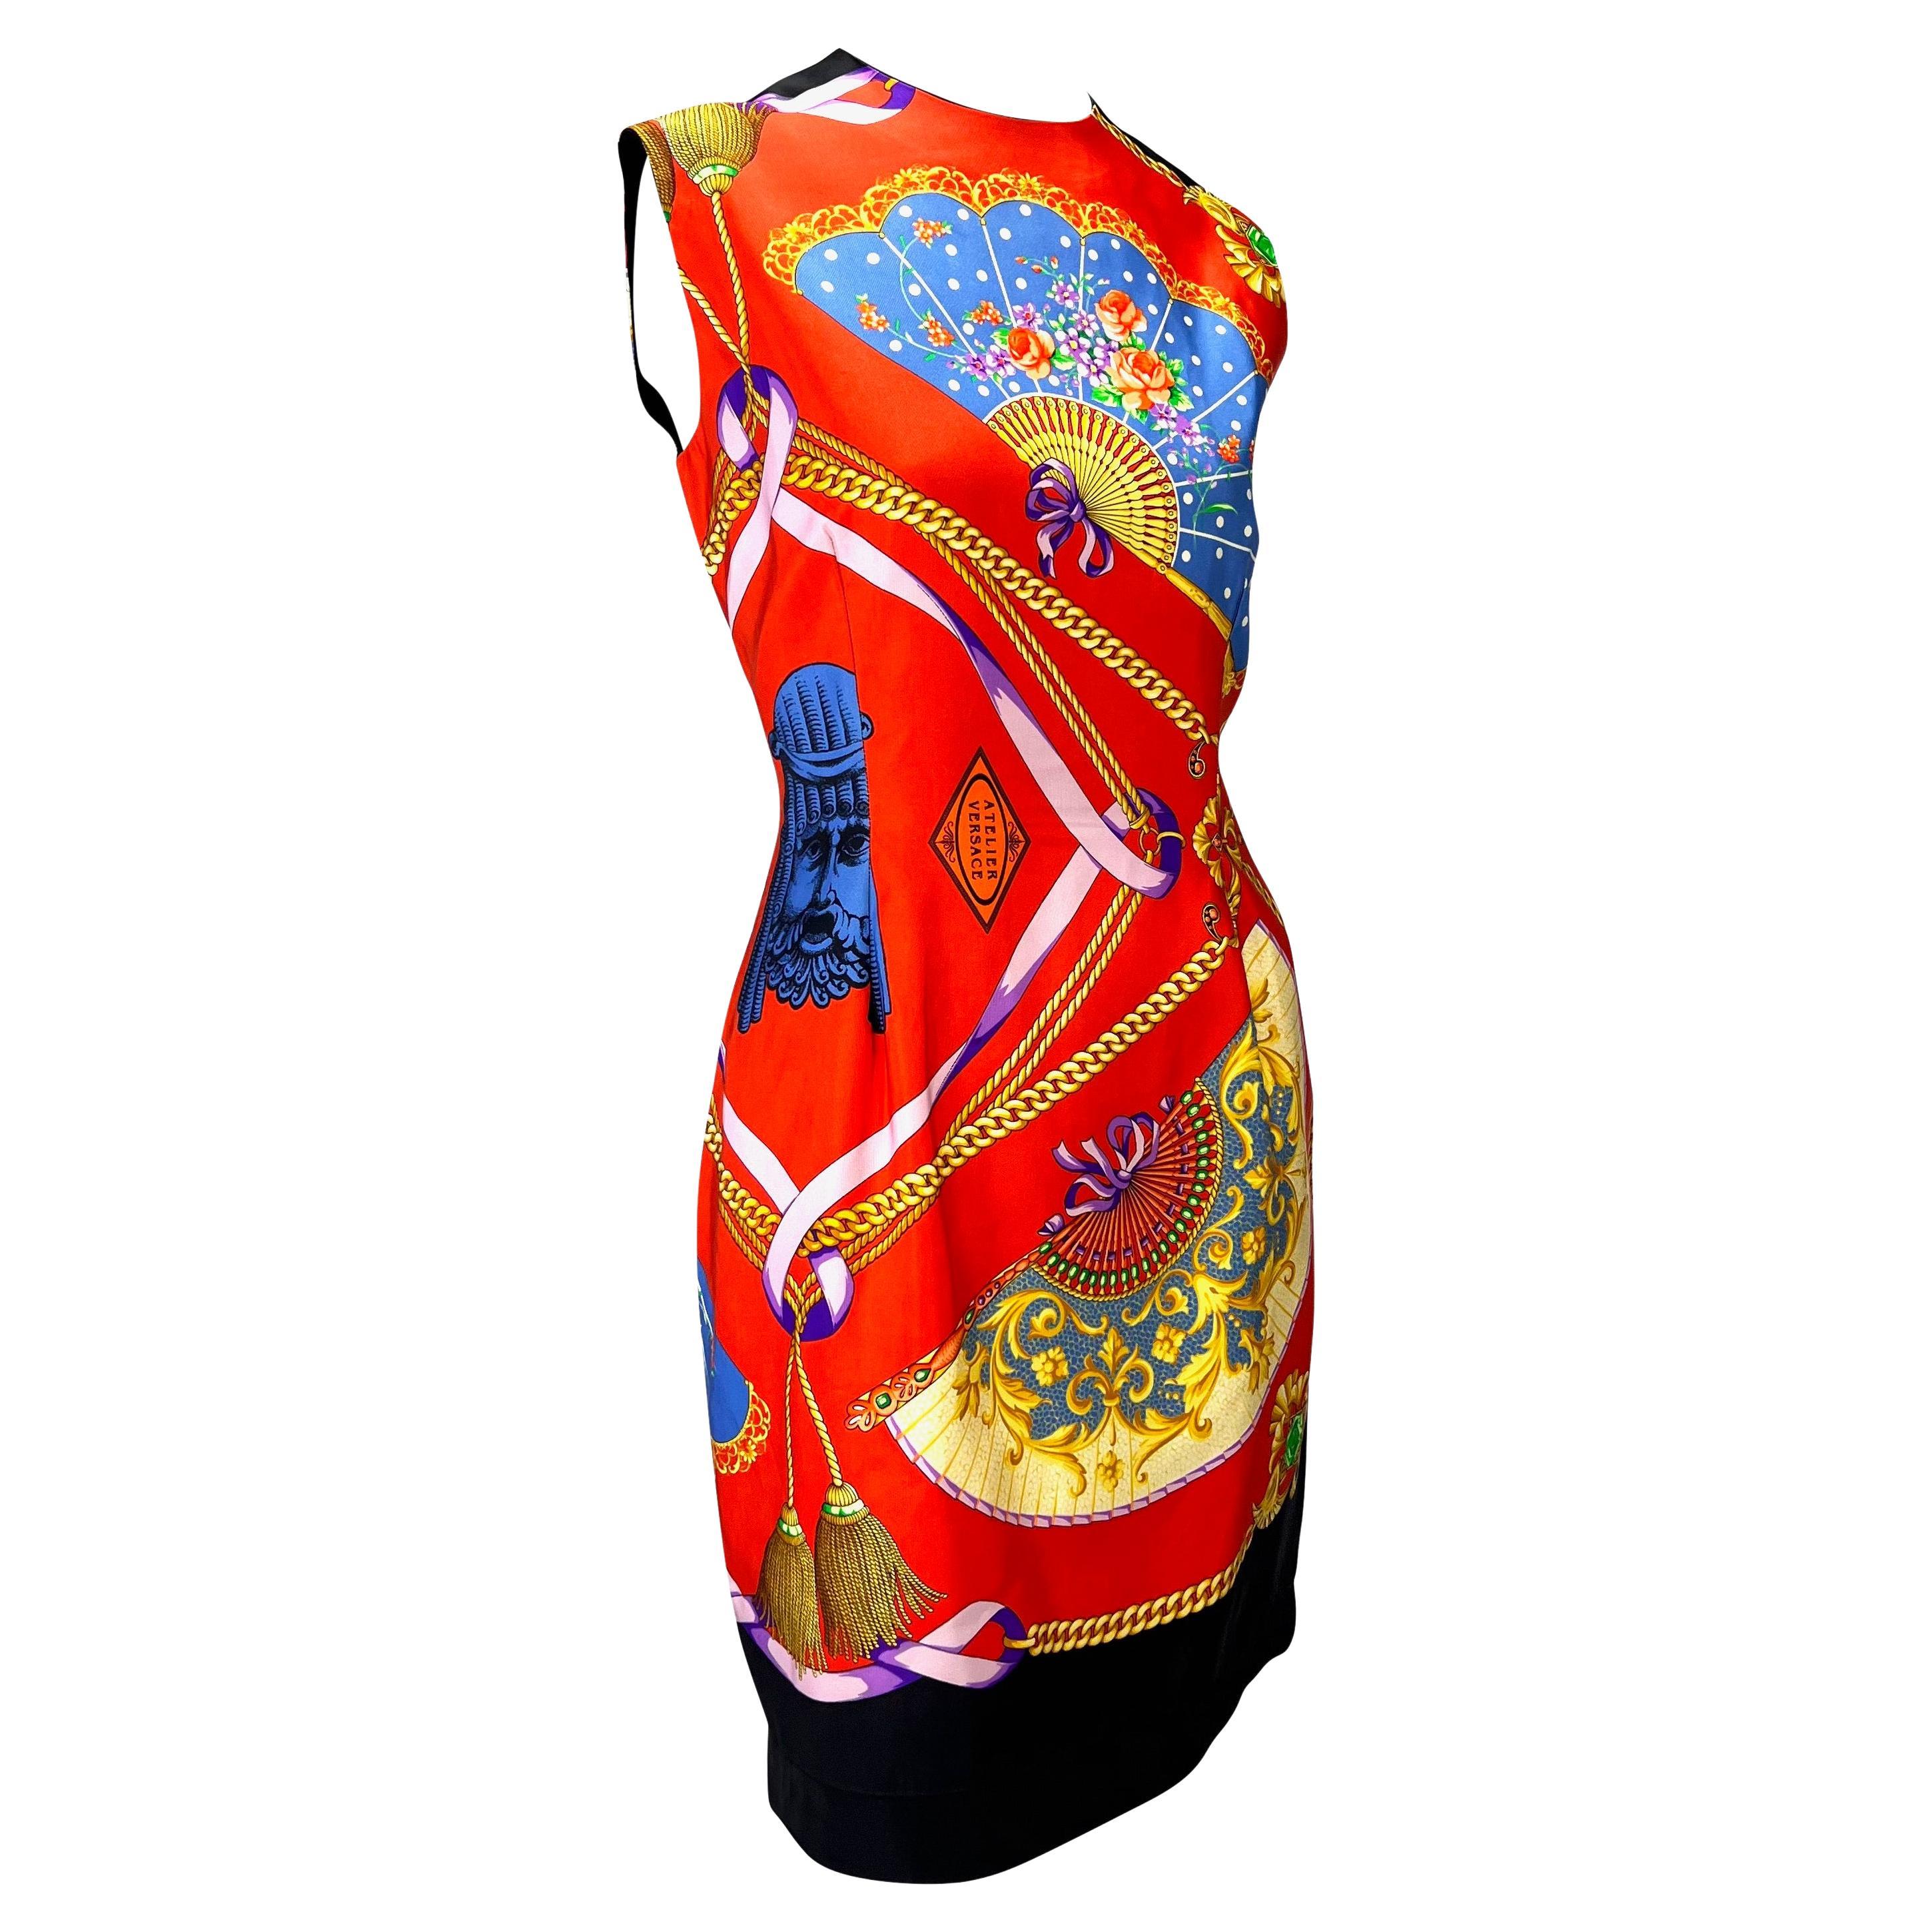 S/S 1991 Gianni Versace Couture Fan Atelier Print Red Silk Sleeveless Dress For Sale 2